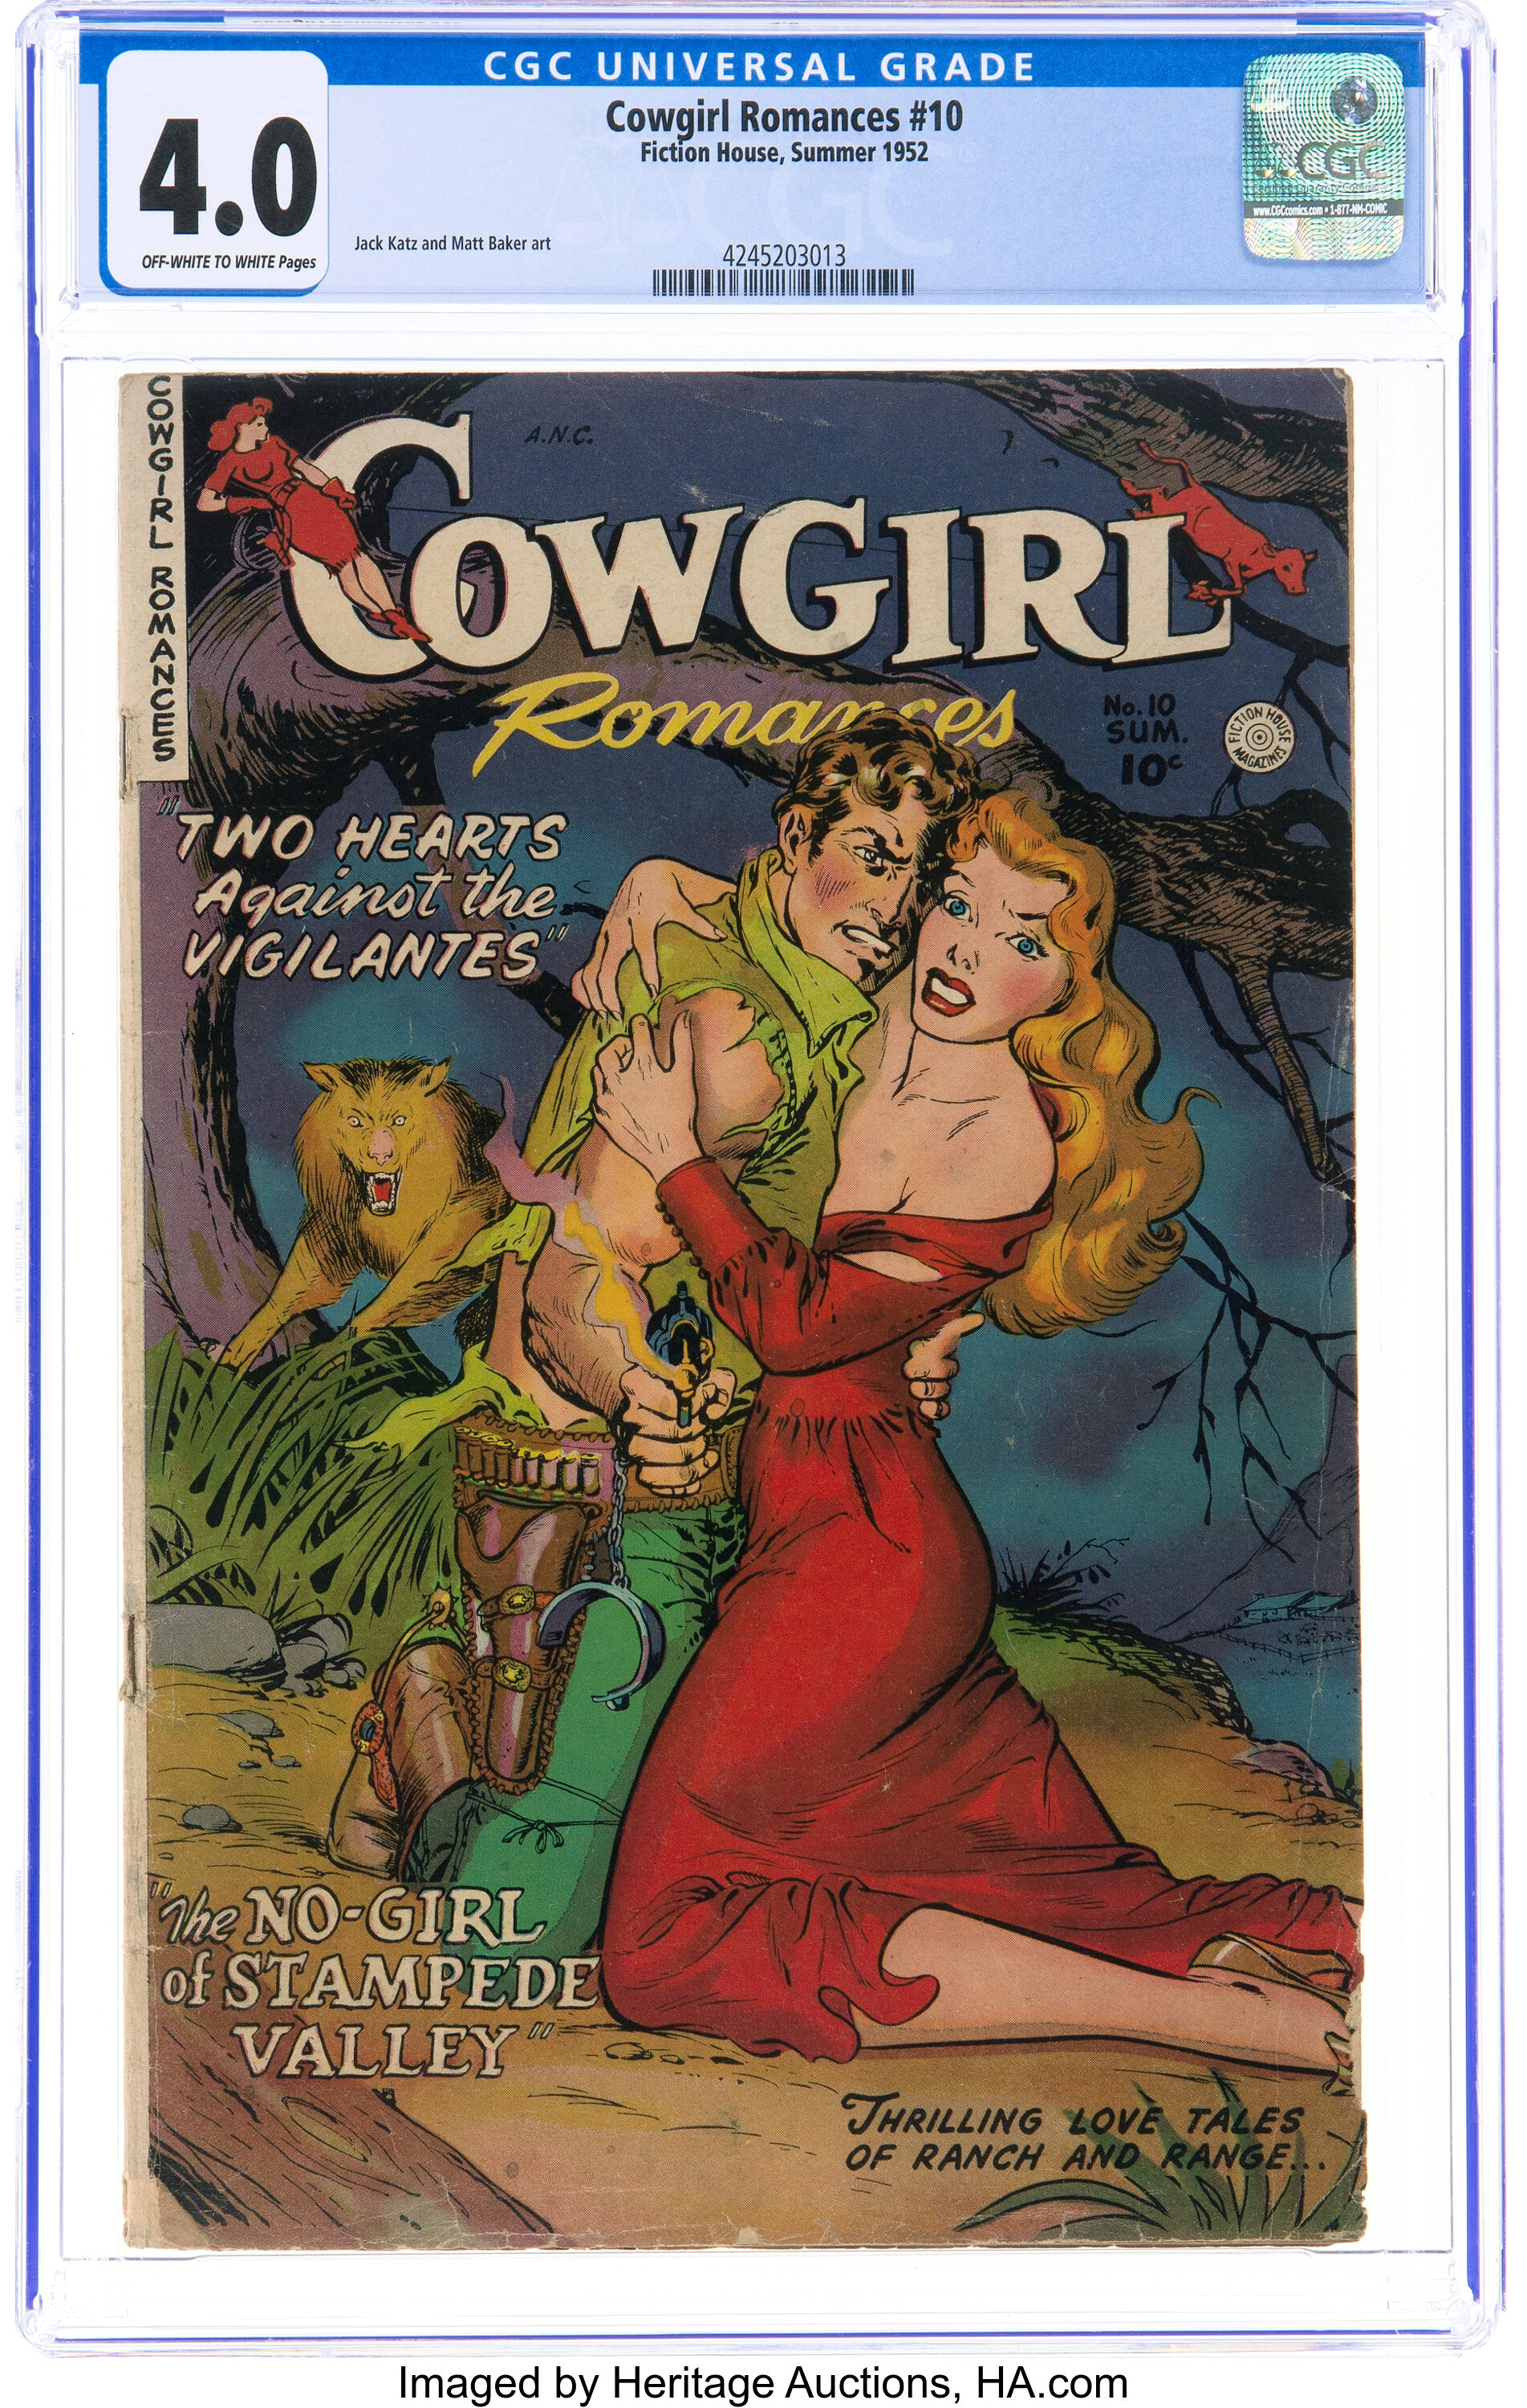 Cowgirl Romances 10 Fiction House 1952 Cgc Vg 40 Off White To Lot 15074 Heritage Auctions 8518